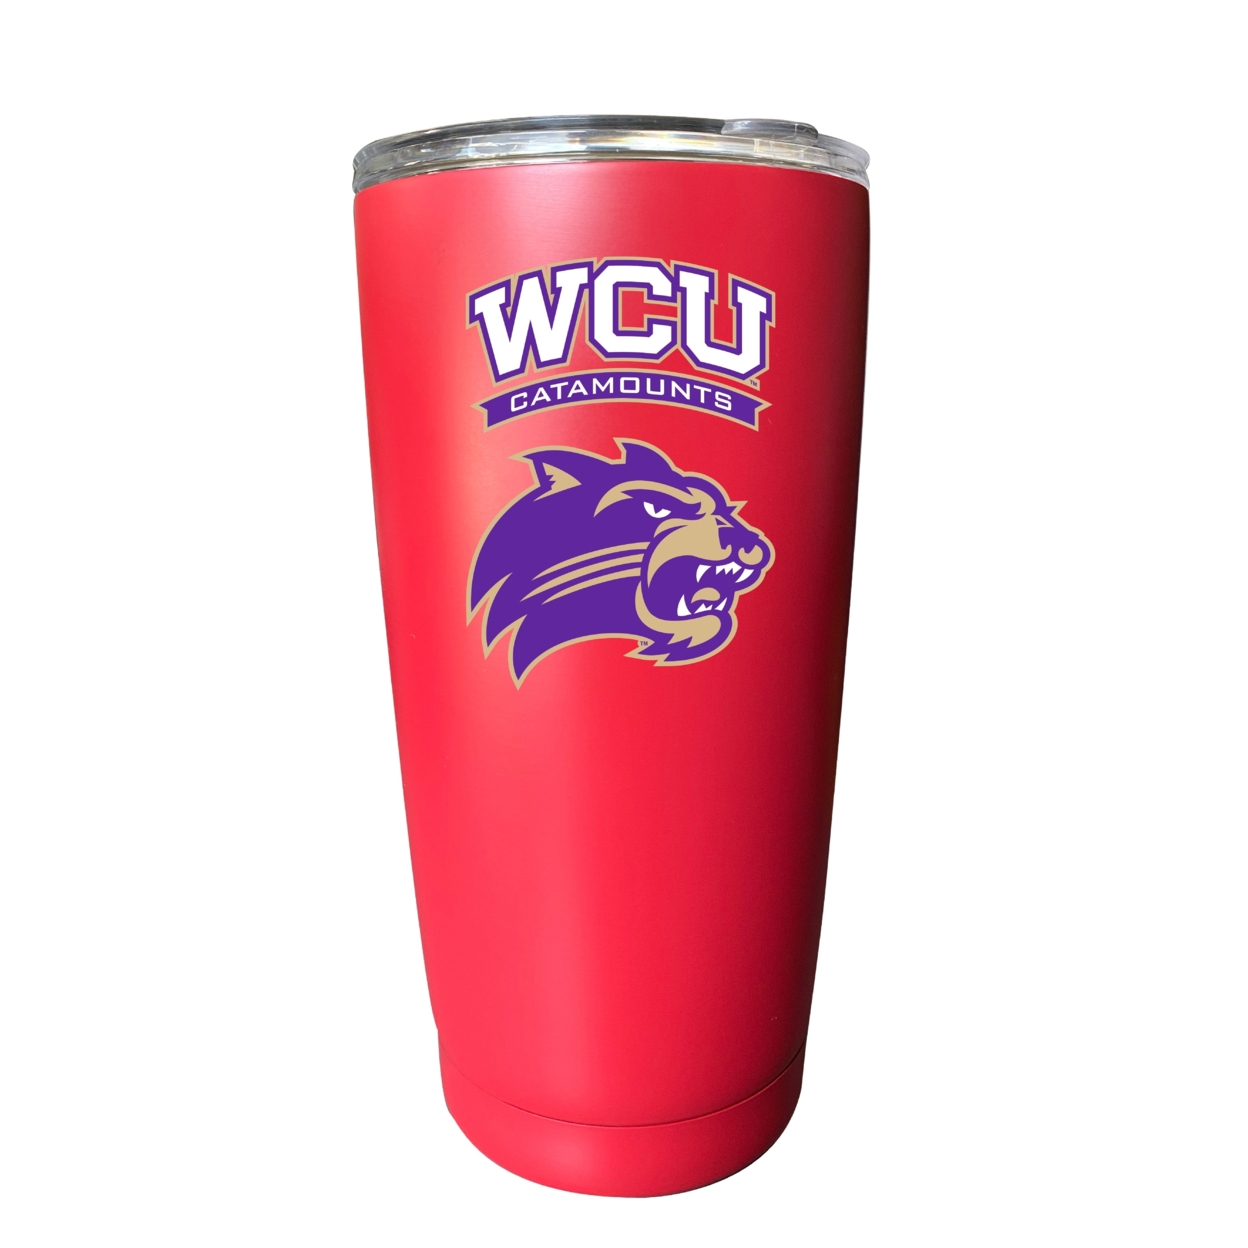 Western Carolina University 16 Oz Insulated Stainless Steel Tumbler - Choose Your Color. - Seafoam